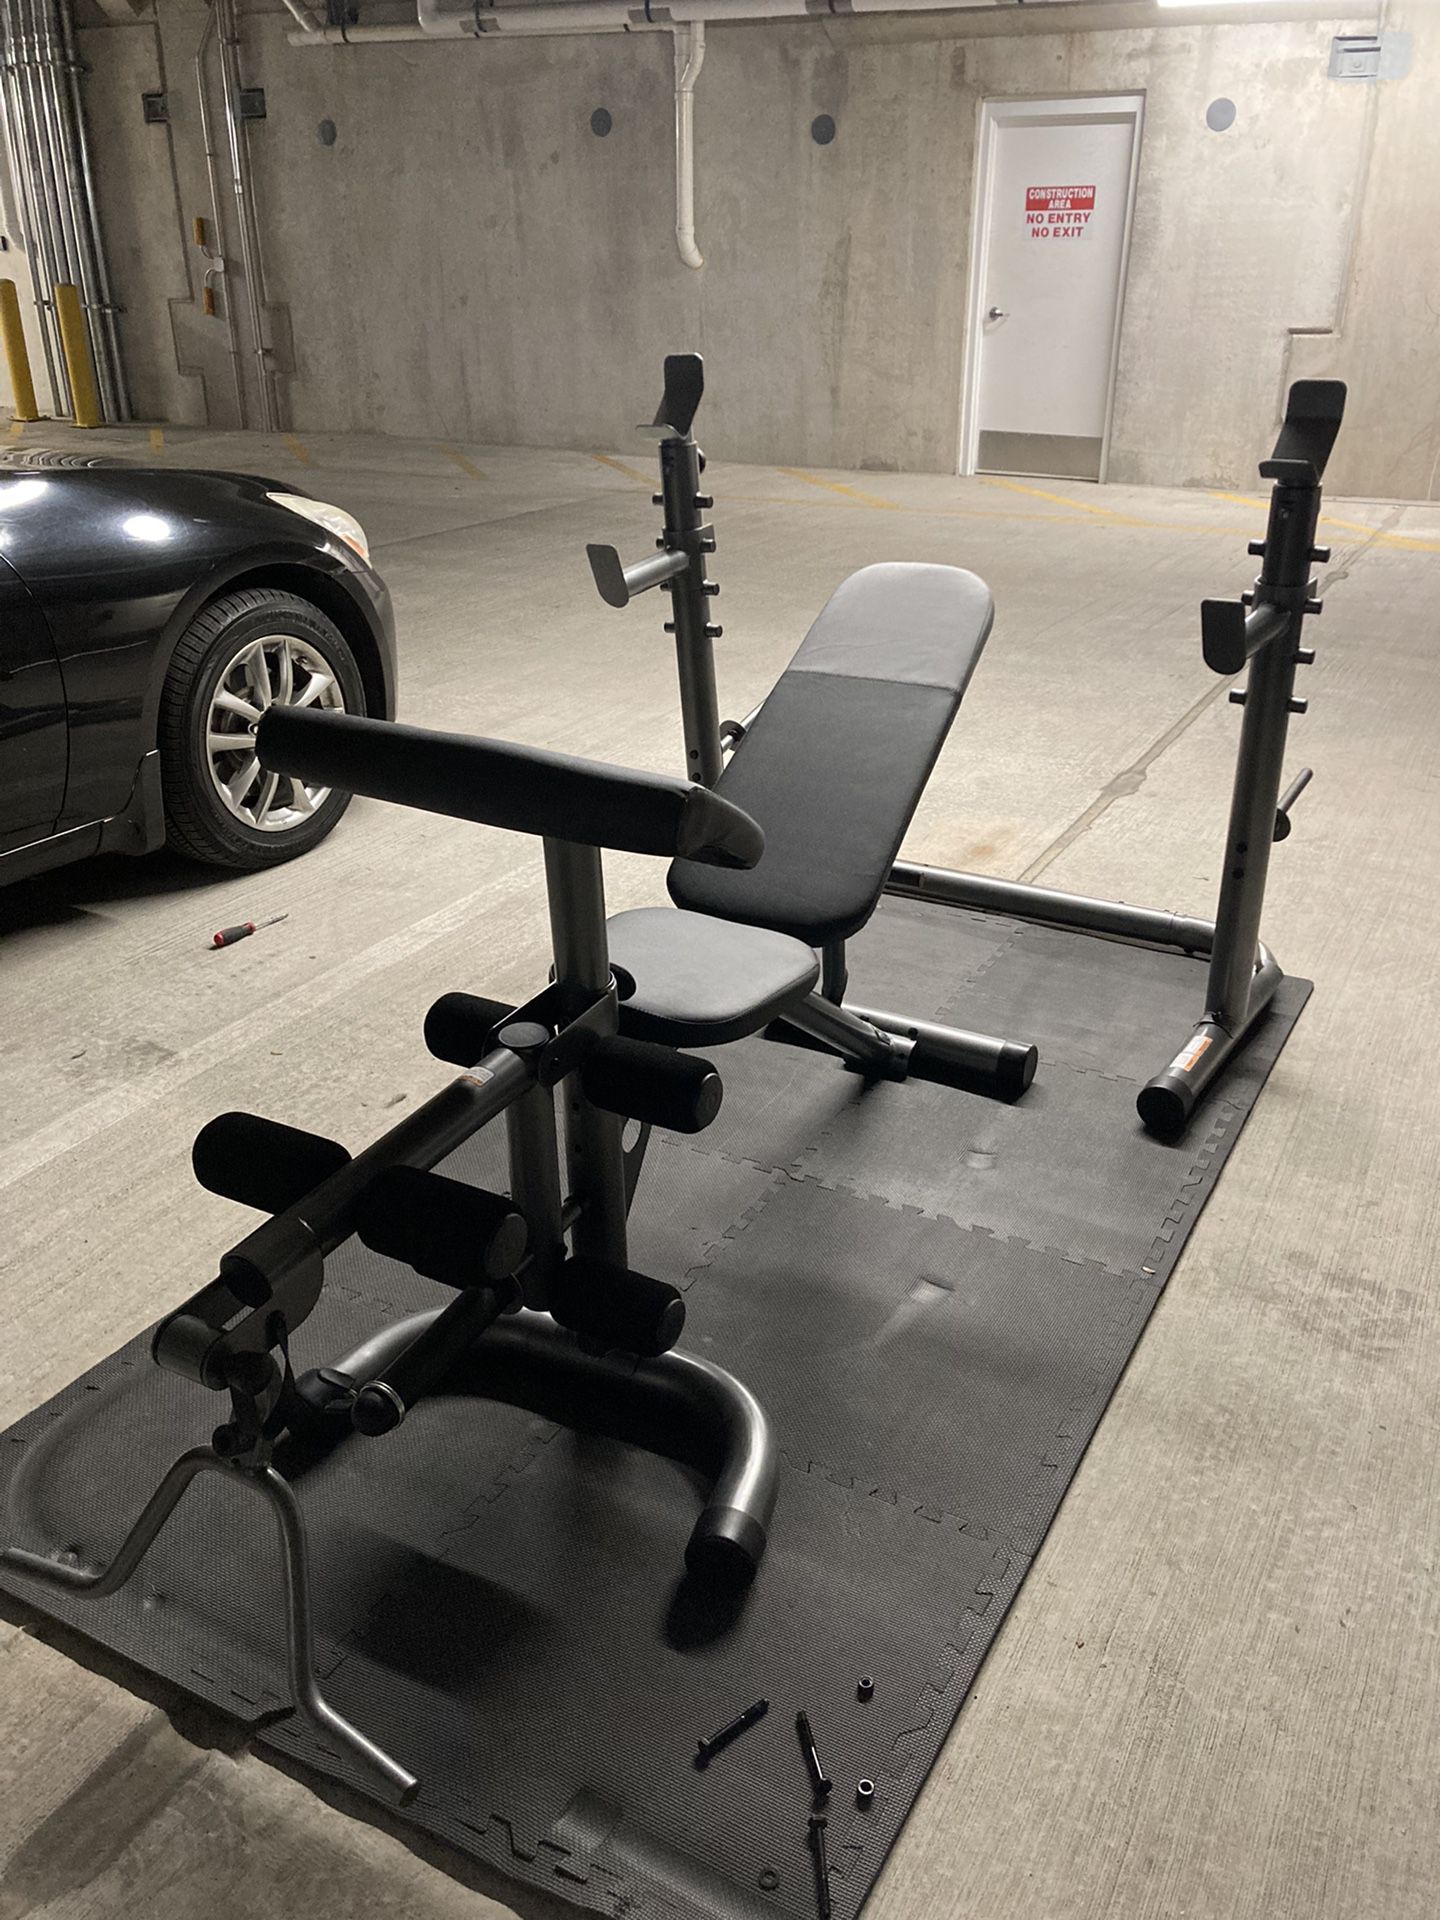 Weight Bench, Squat Stands, And Mats